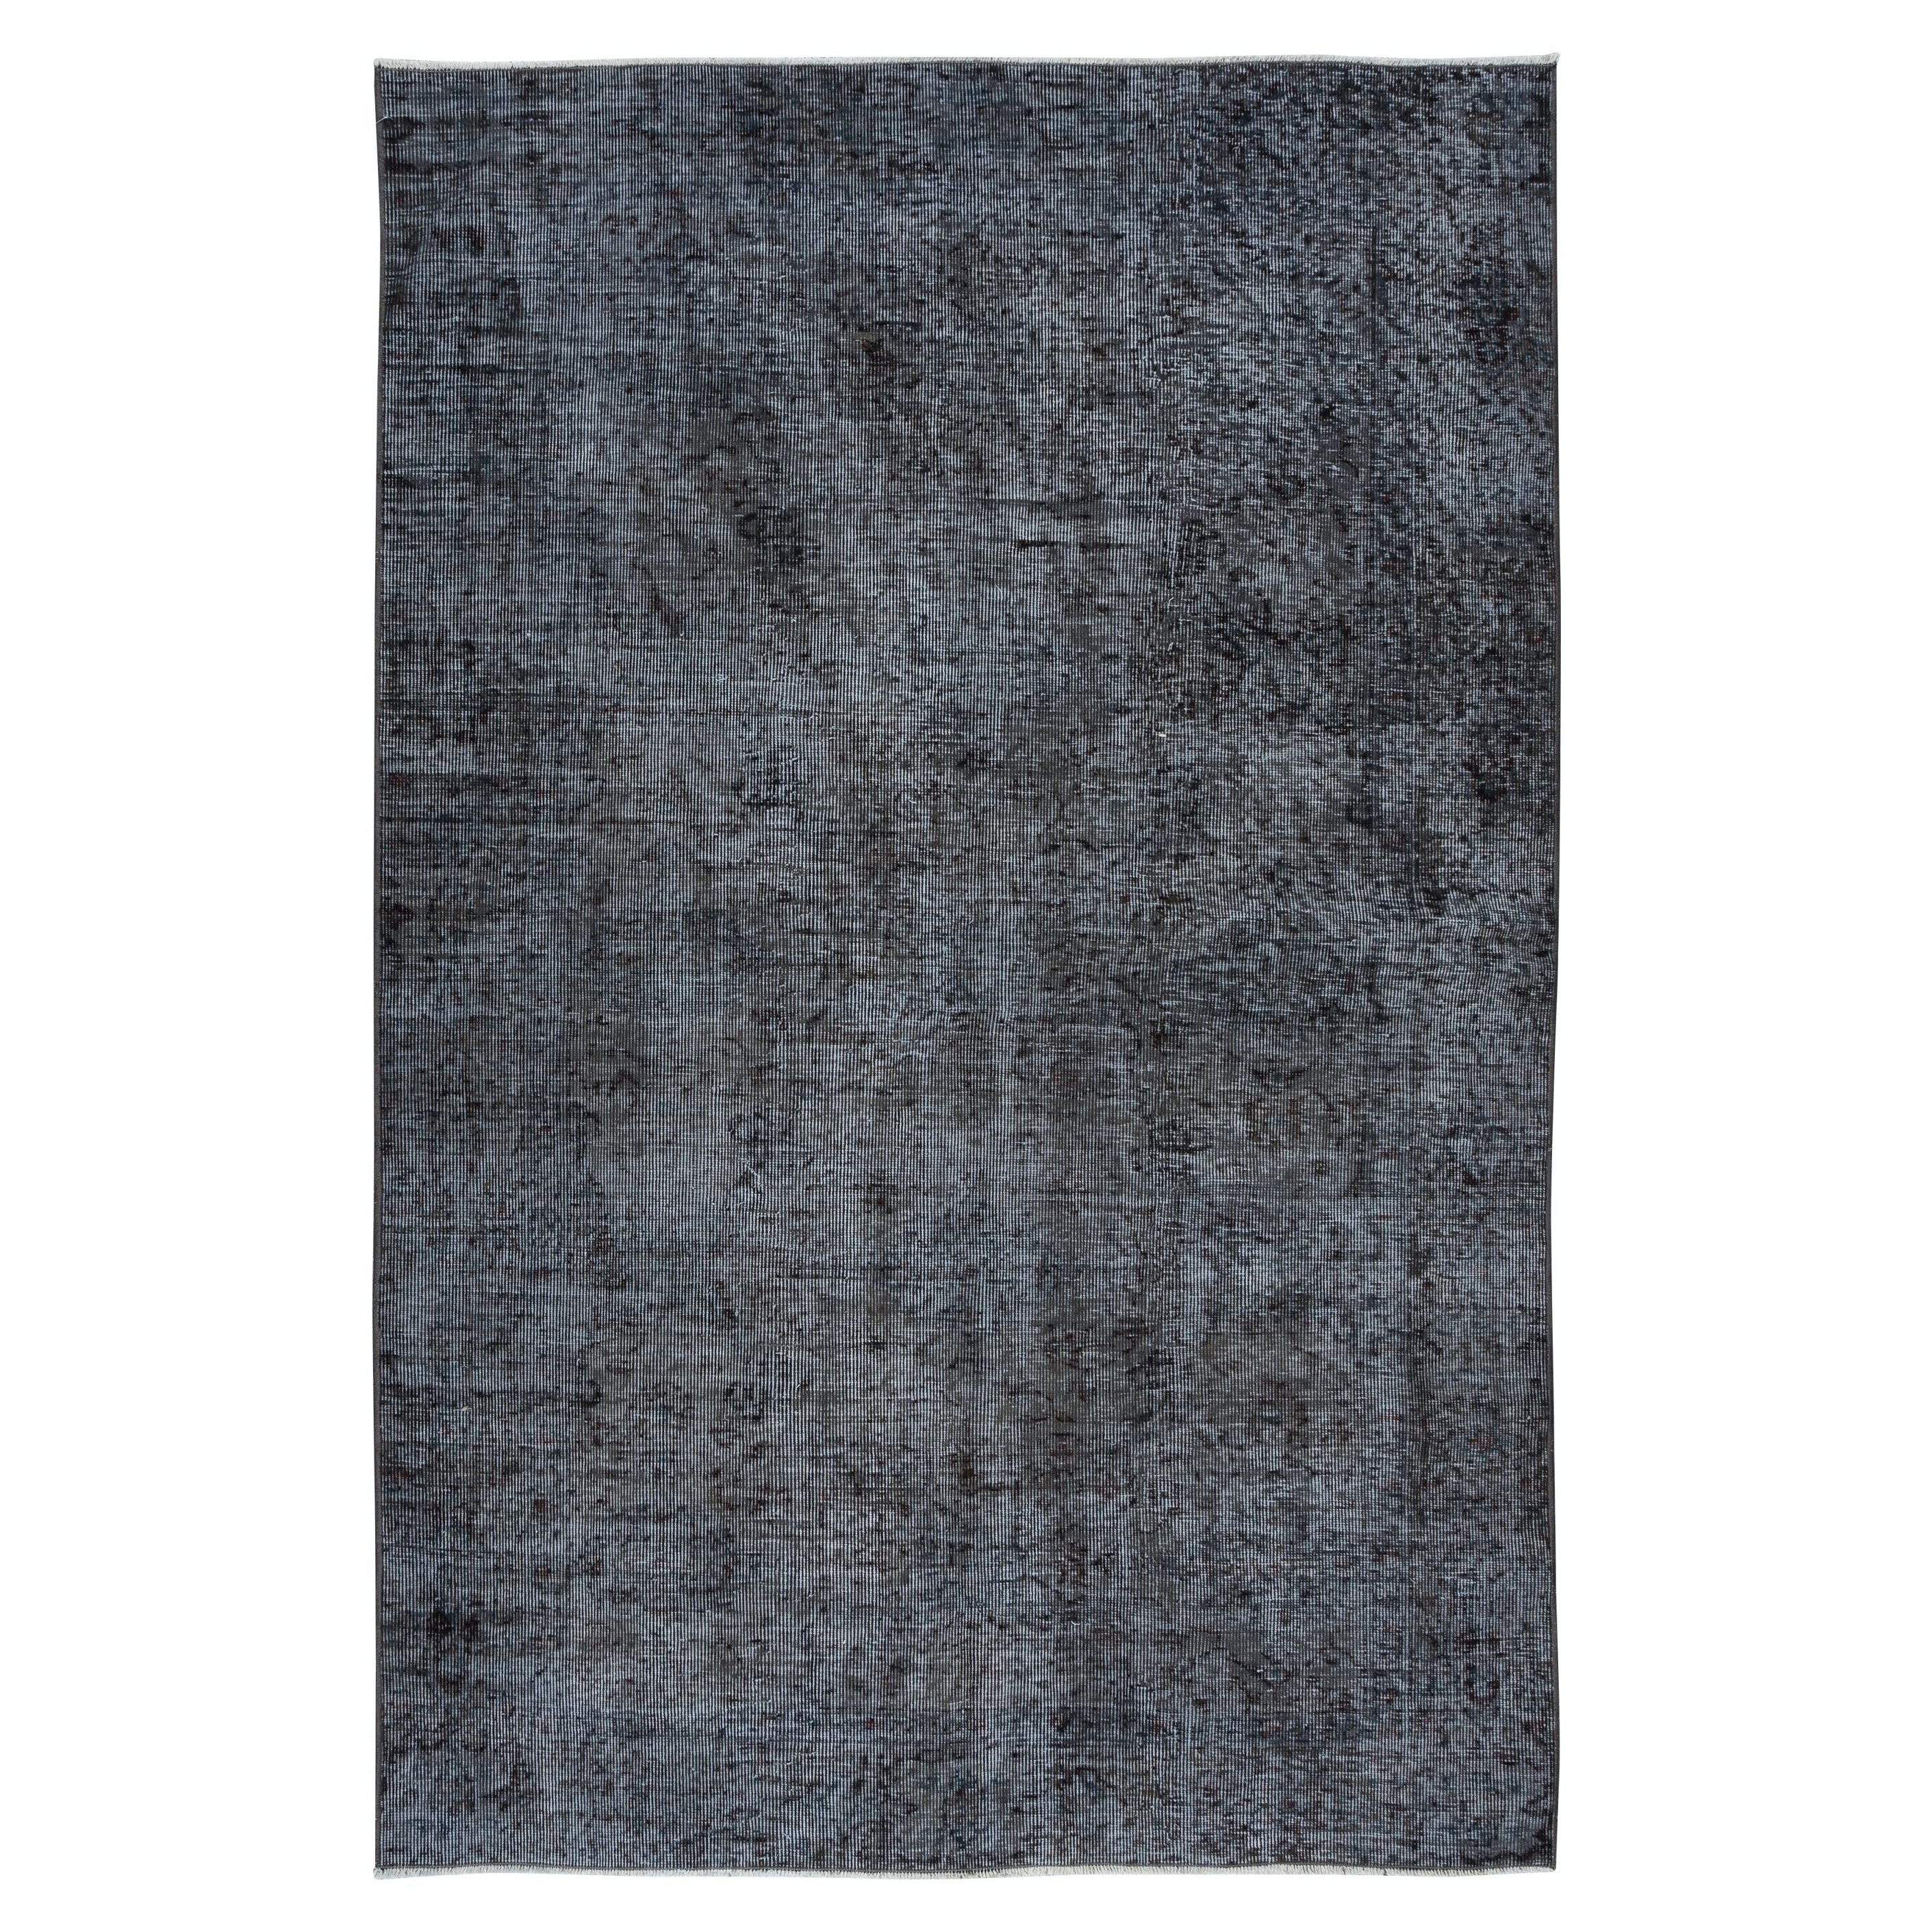 4.8x7.2 Ft Turkish Handmade Wool Rug in Gray Tones, Ideal for Modern Interiors